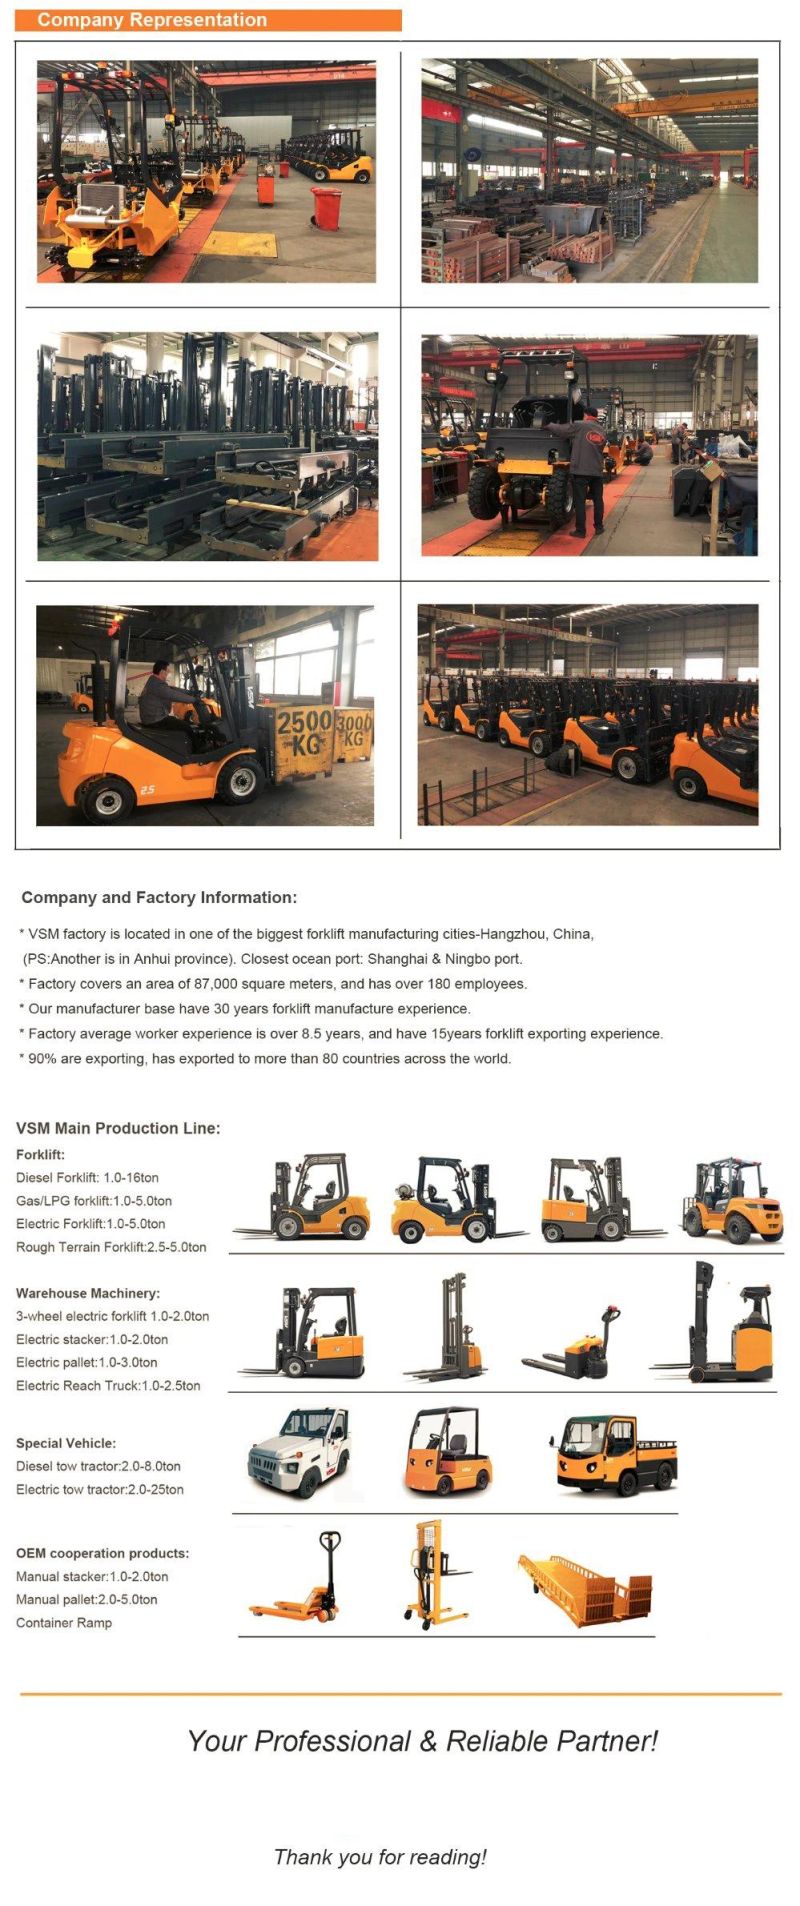 2-3.5ton Gas Petrol LPG Forklift with Japanese Engine